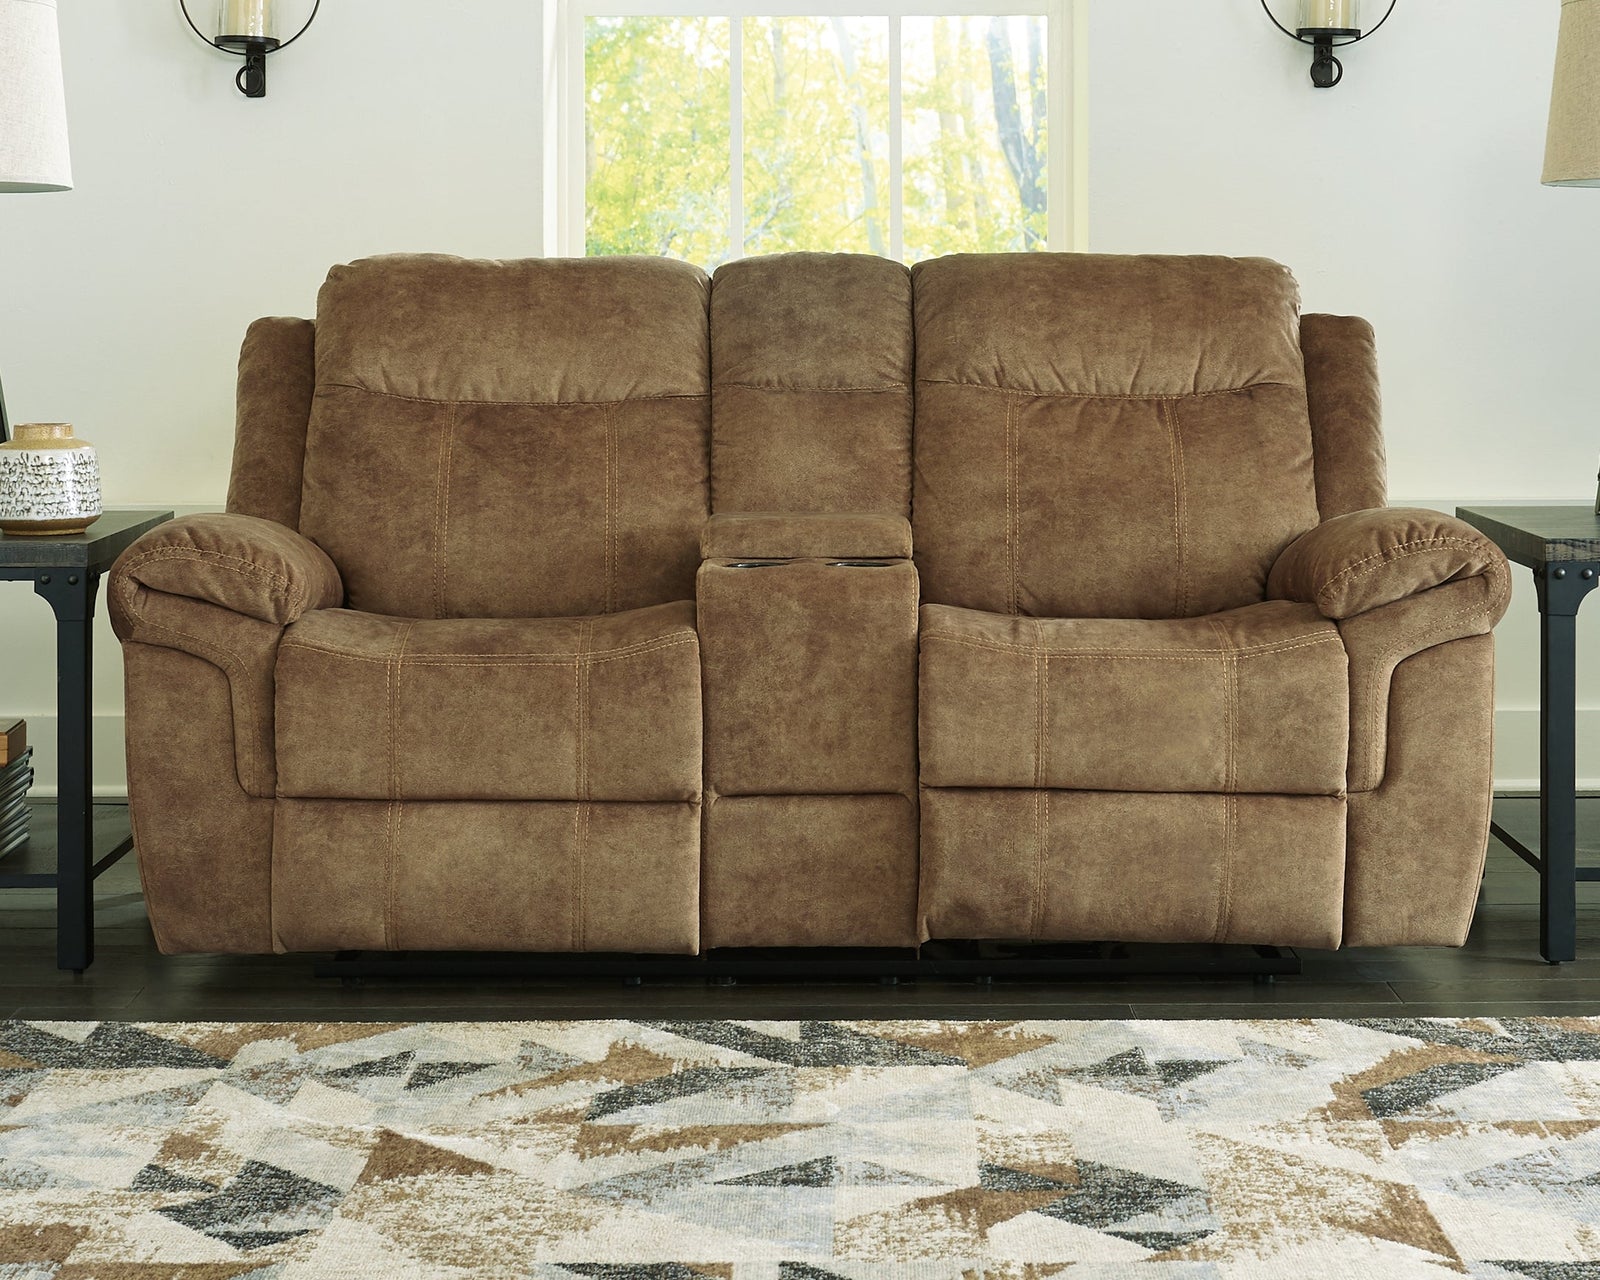 Huddle-up Nutmeg Microfiber Glider Reclining Loveseat With Console